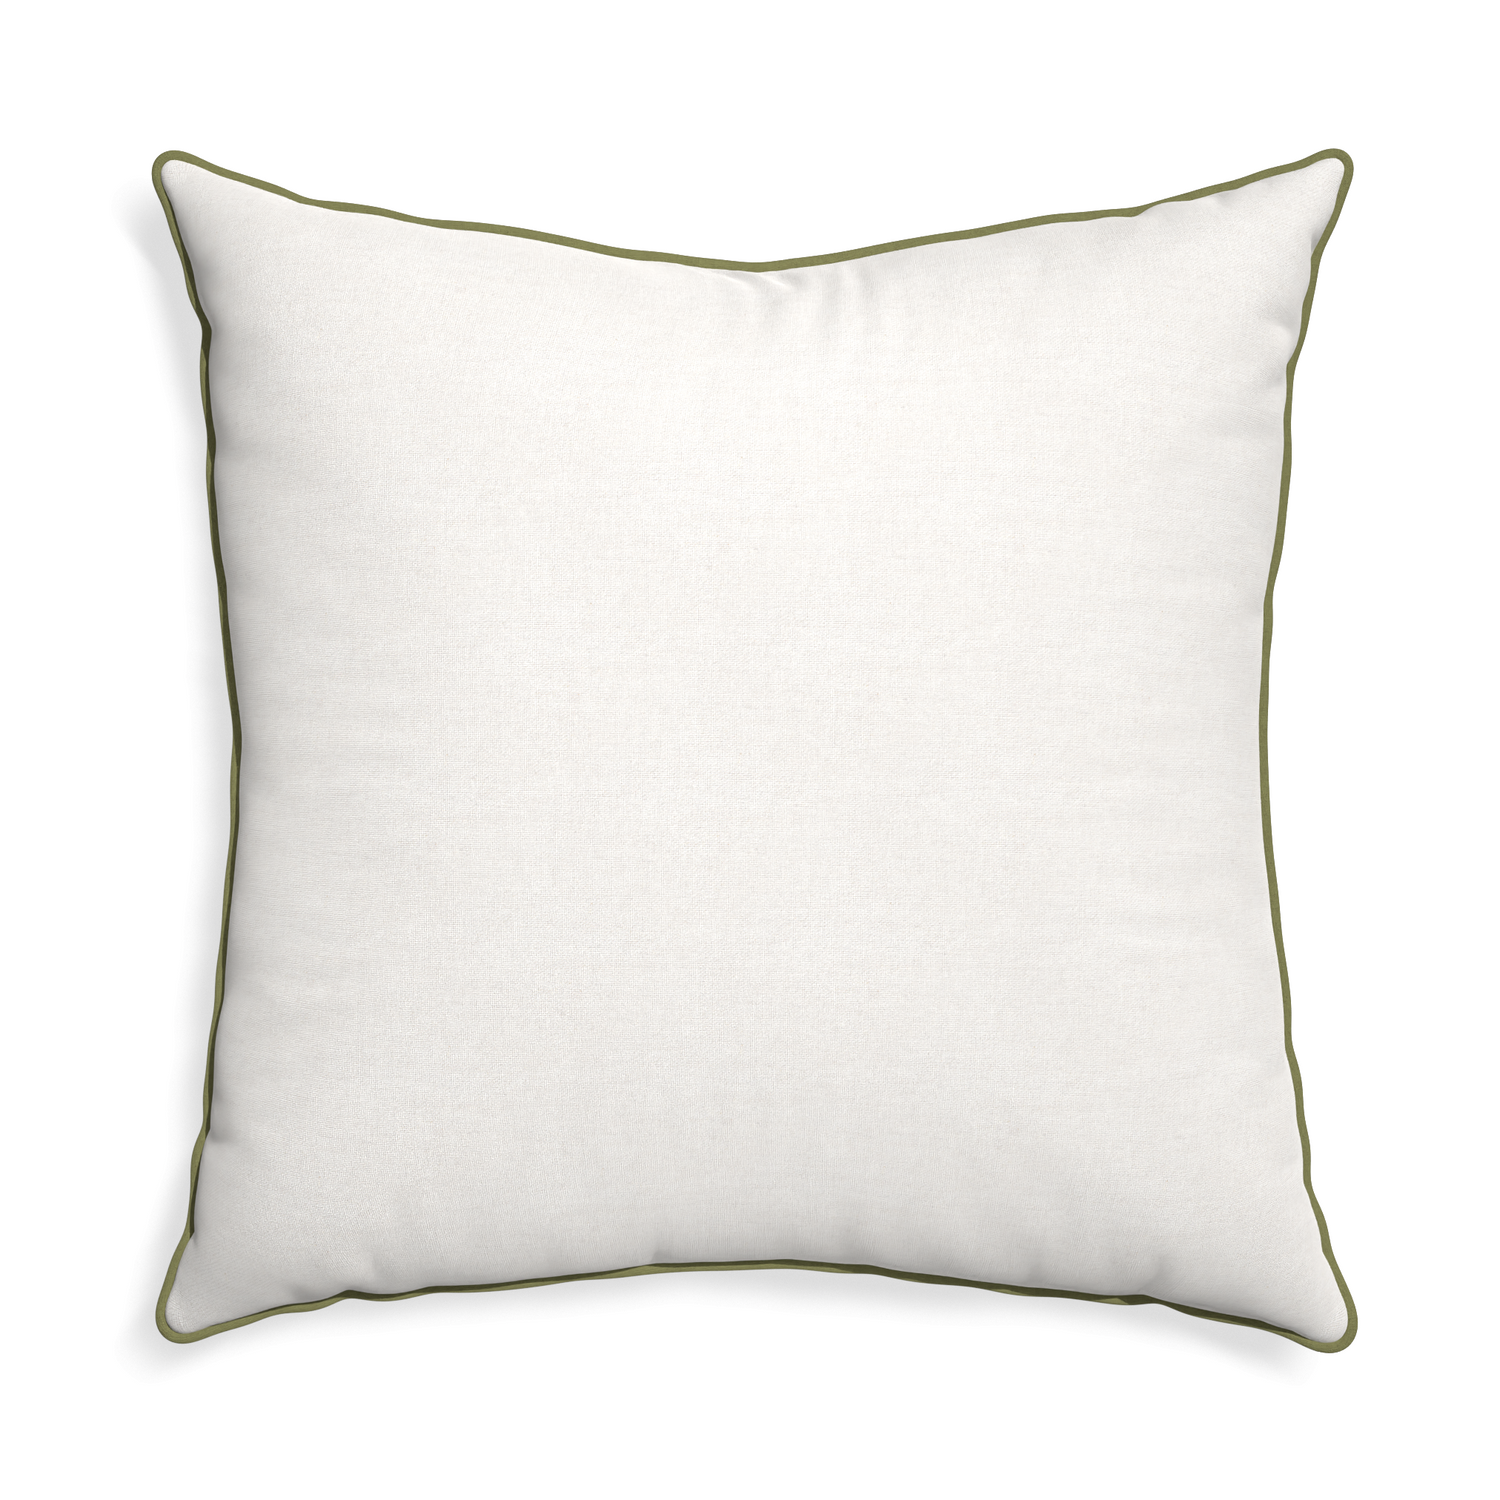 Euro-sham flour custom pillow with moss piping on white background